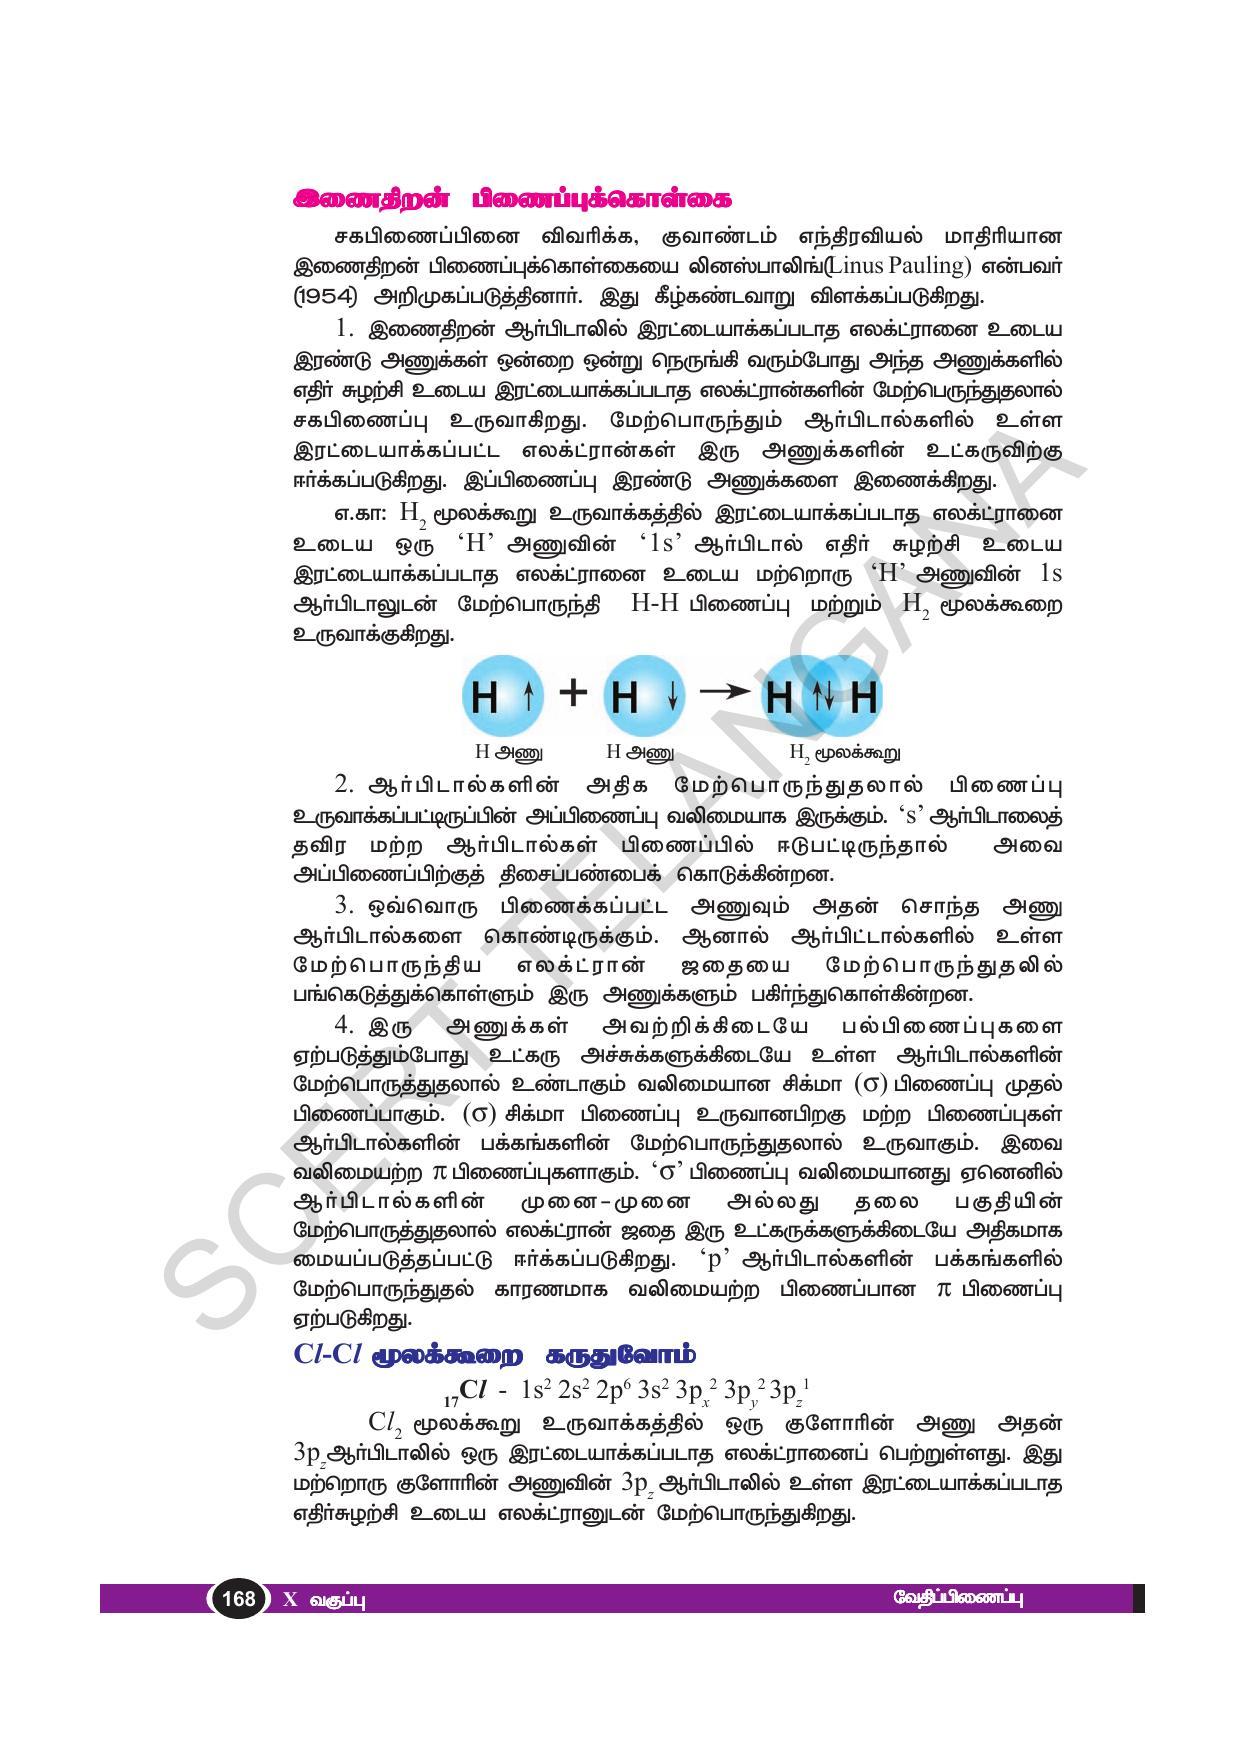 TS SCERT Class 10 Physical Science(Tamil Medium) Text Book - Page 180